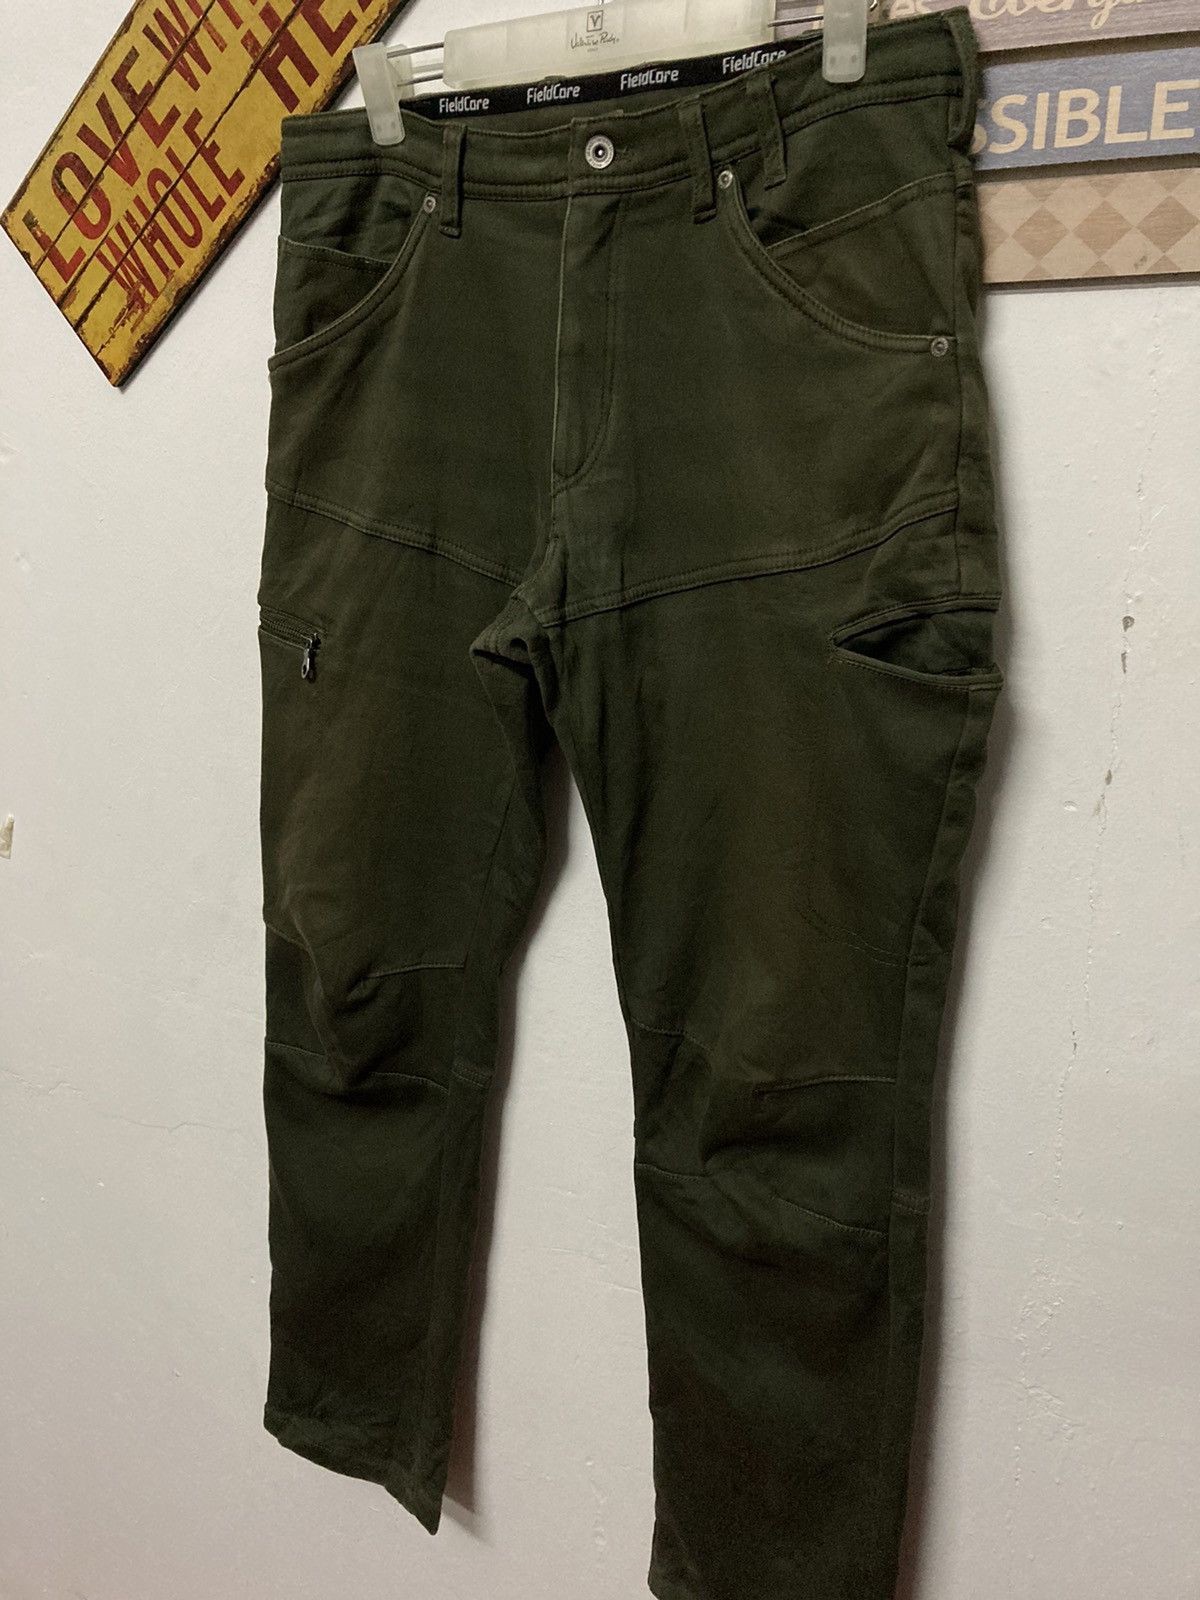 Vintage - Fieldcore Tactical Outdoor Thermal Pants - 3